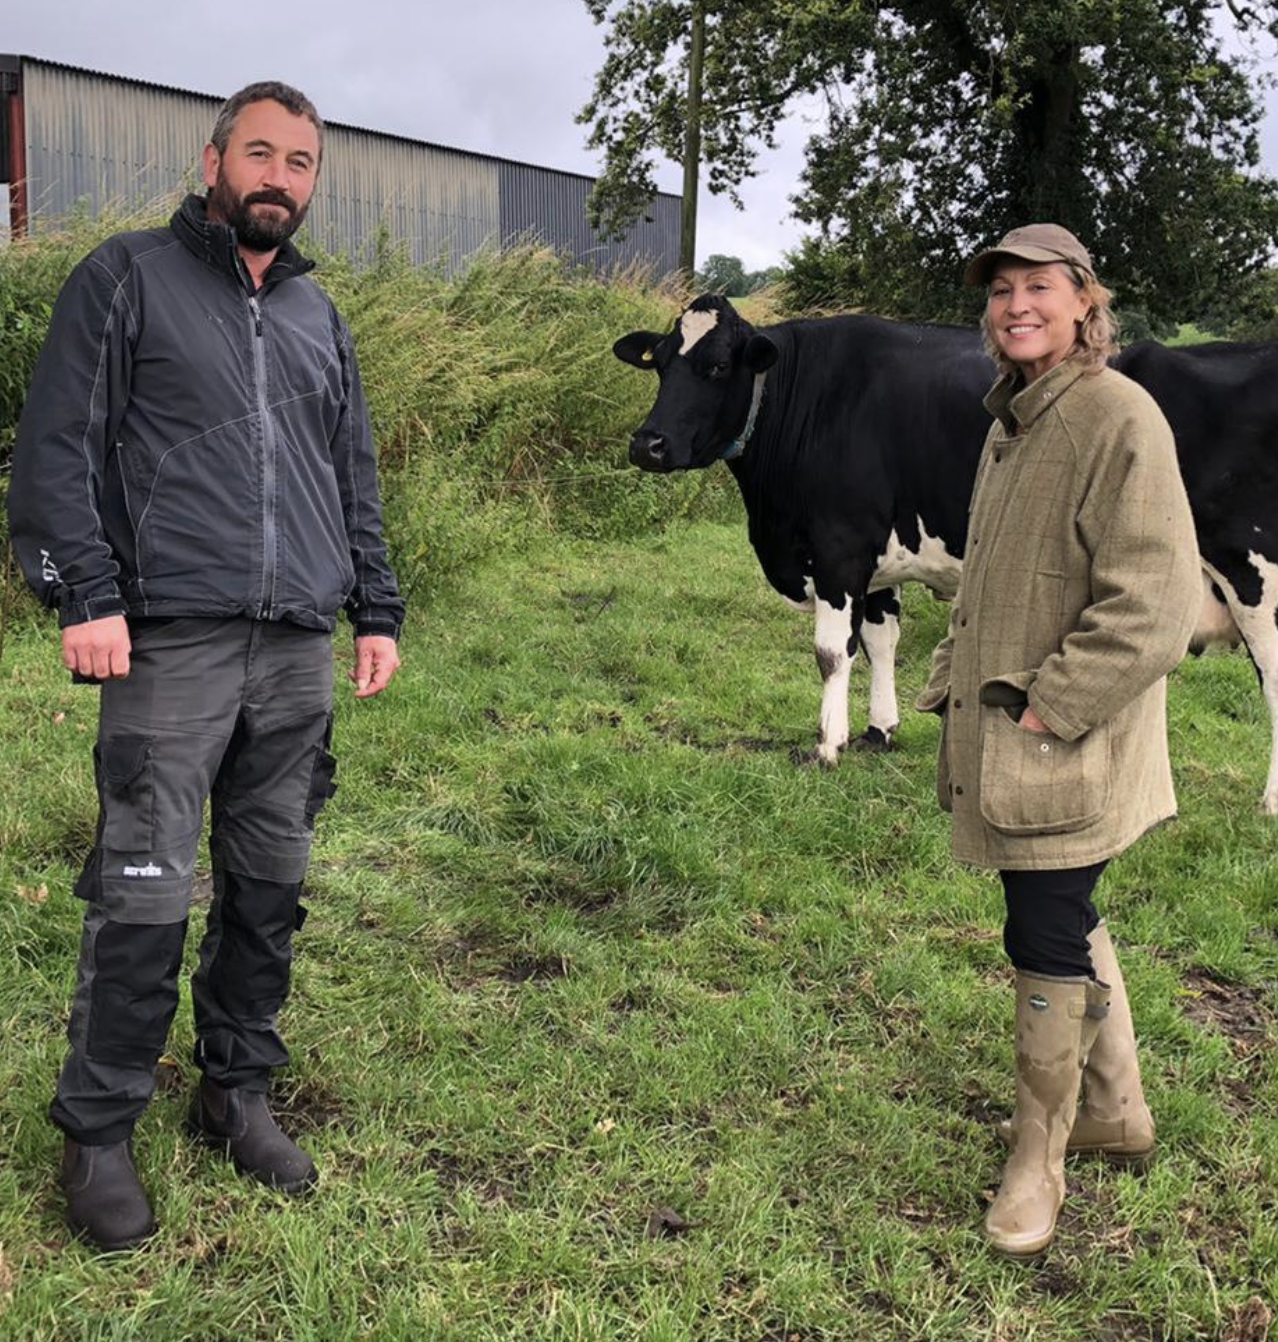 Environment Minister Rebecca Pow with Henry Pym on his farm near Chard, Somerset